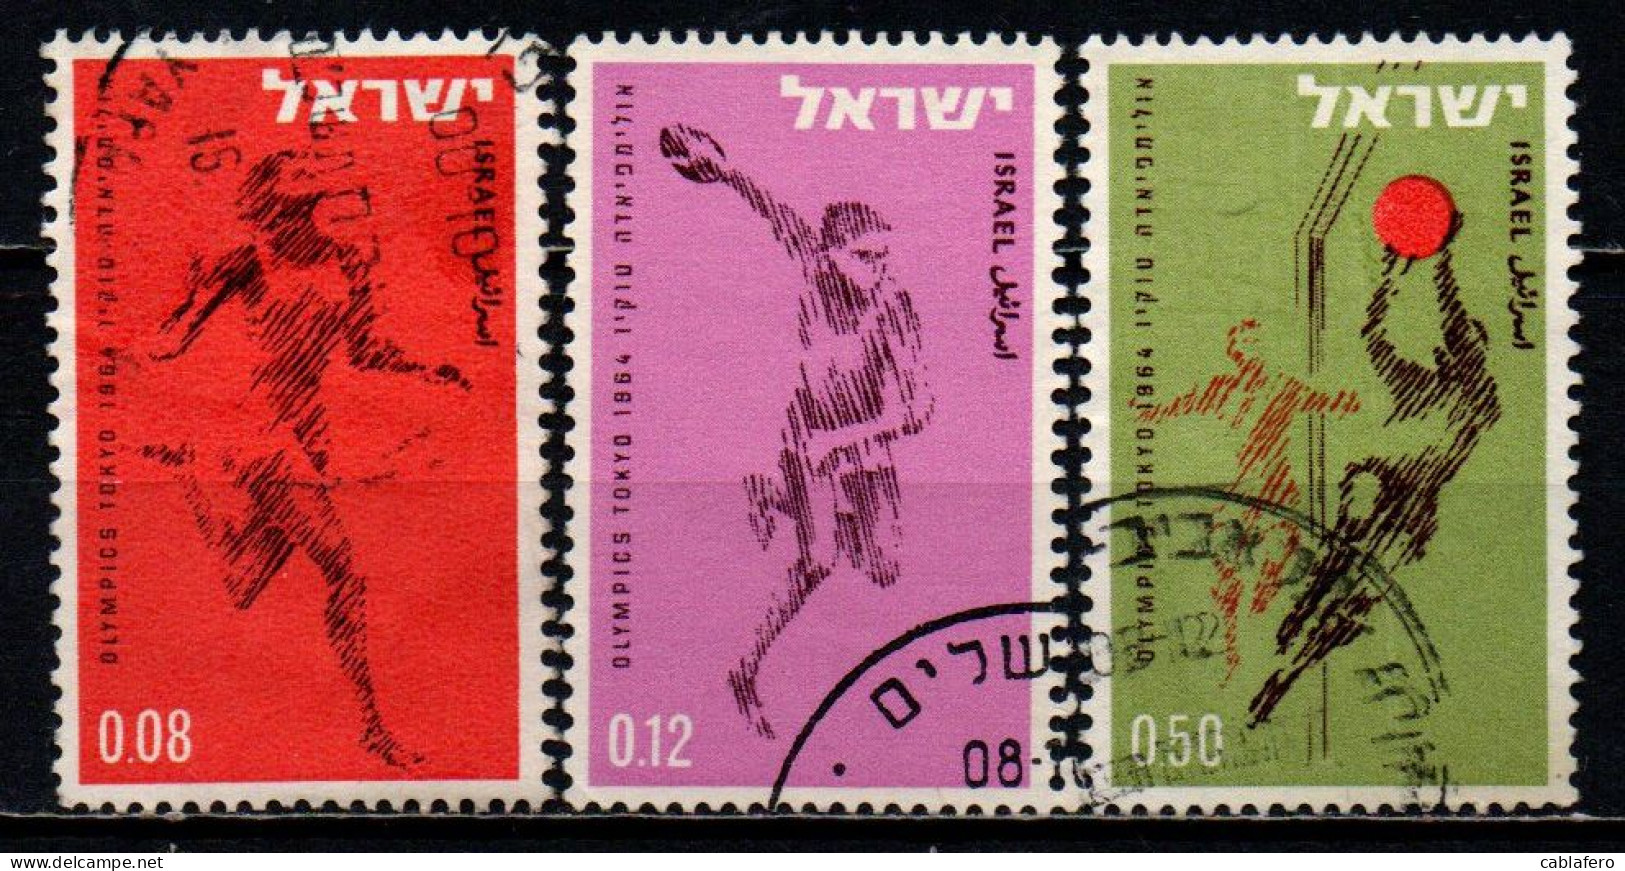 ISRAELE - 1964 - Israel’s Participation In The 18th Olympic Games, Tokyo, Oct. 10-25 - USATI - Used Stamps (without Tabs)